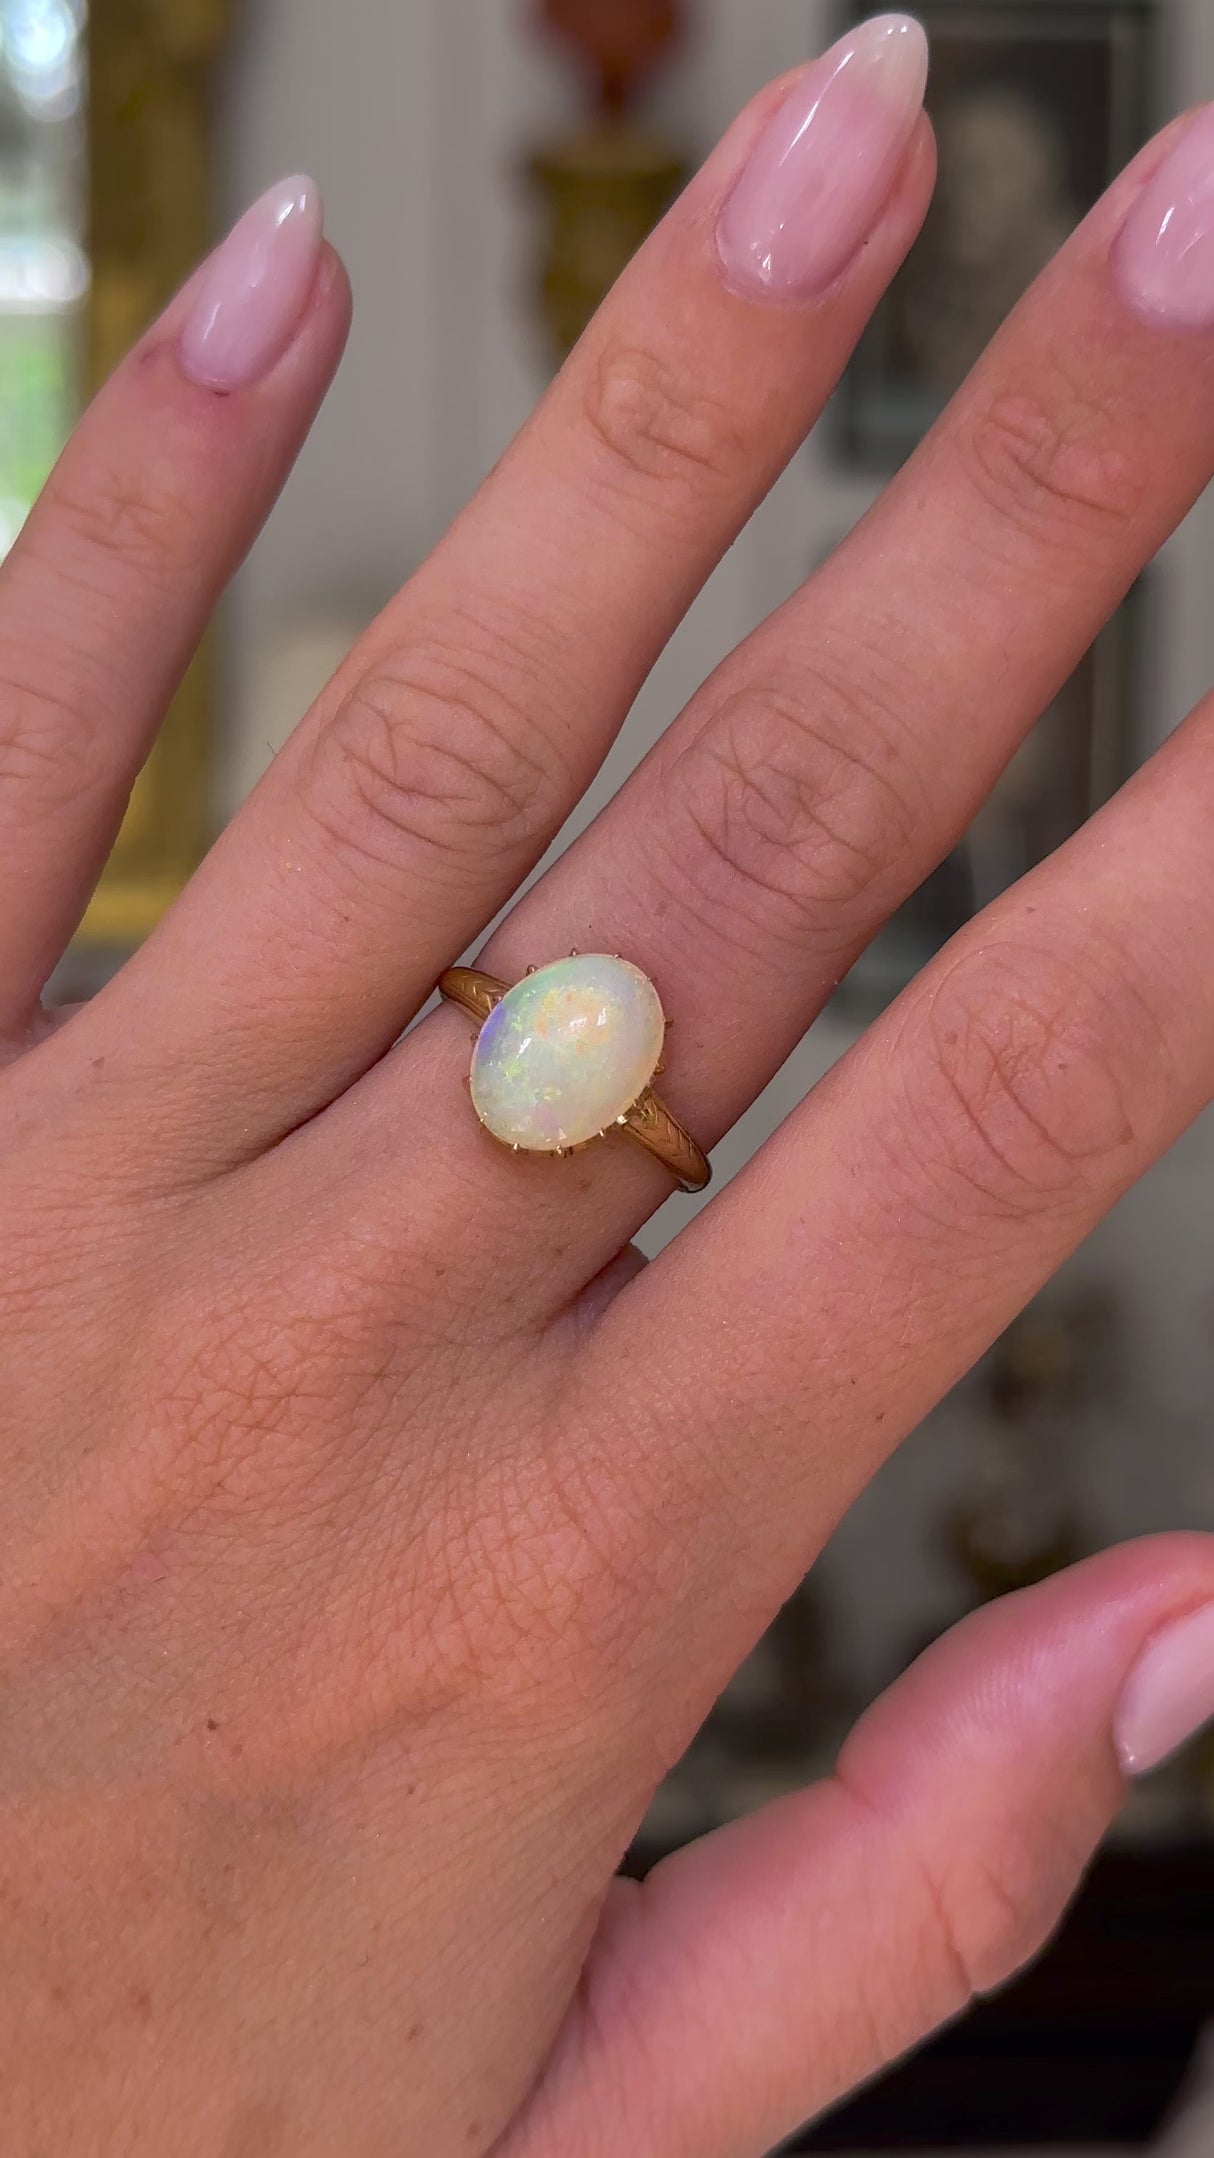 Antique, Victorian cabochon white Australian opal ring, 18ct yellow gold